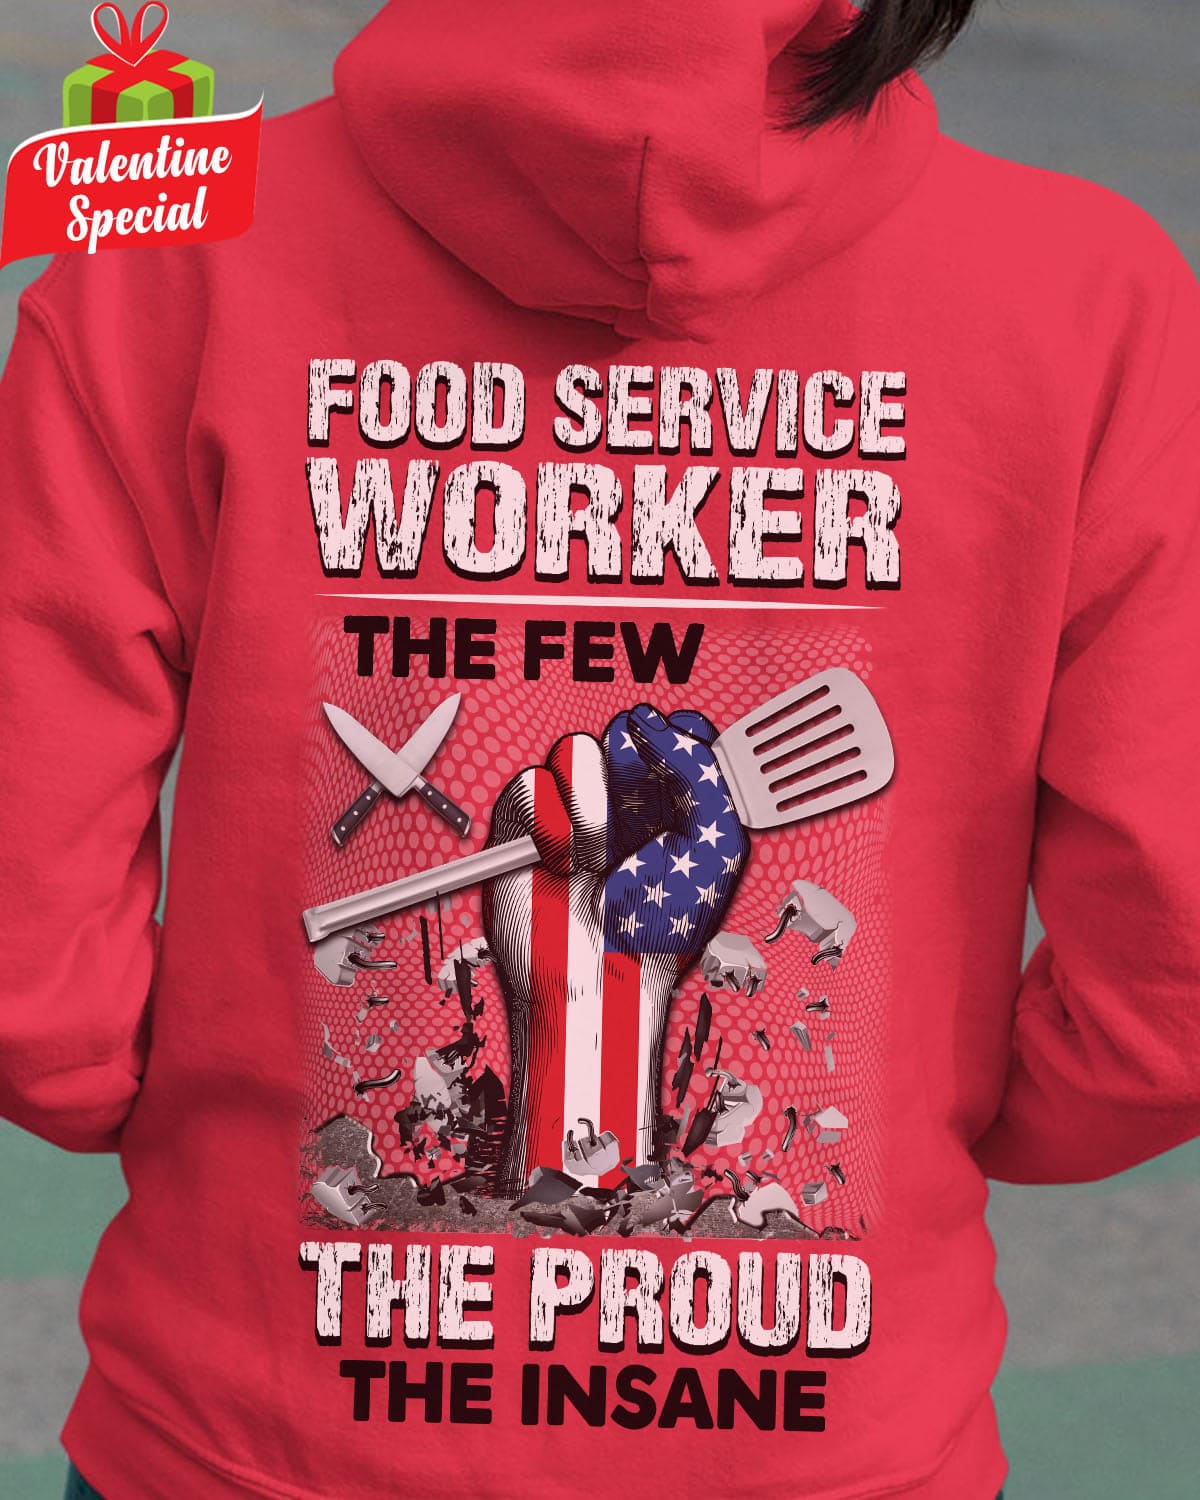 Food service worker, the few, the proud, the insane